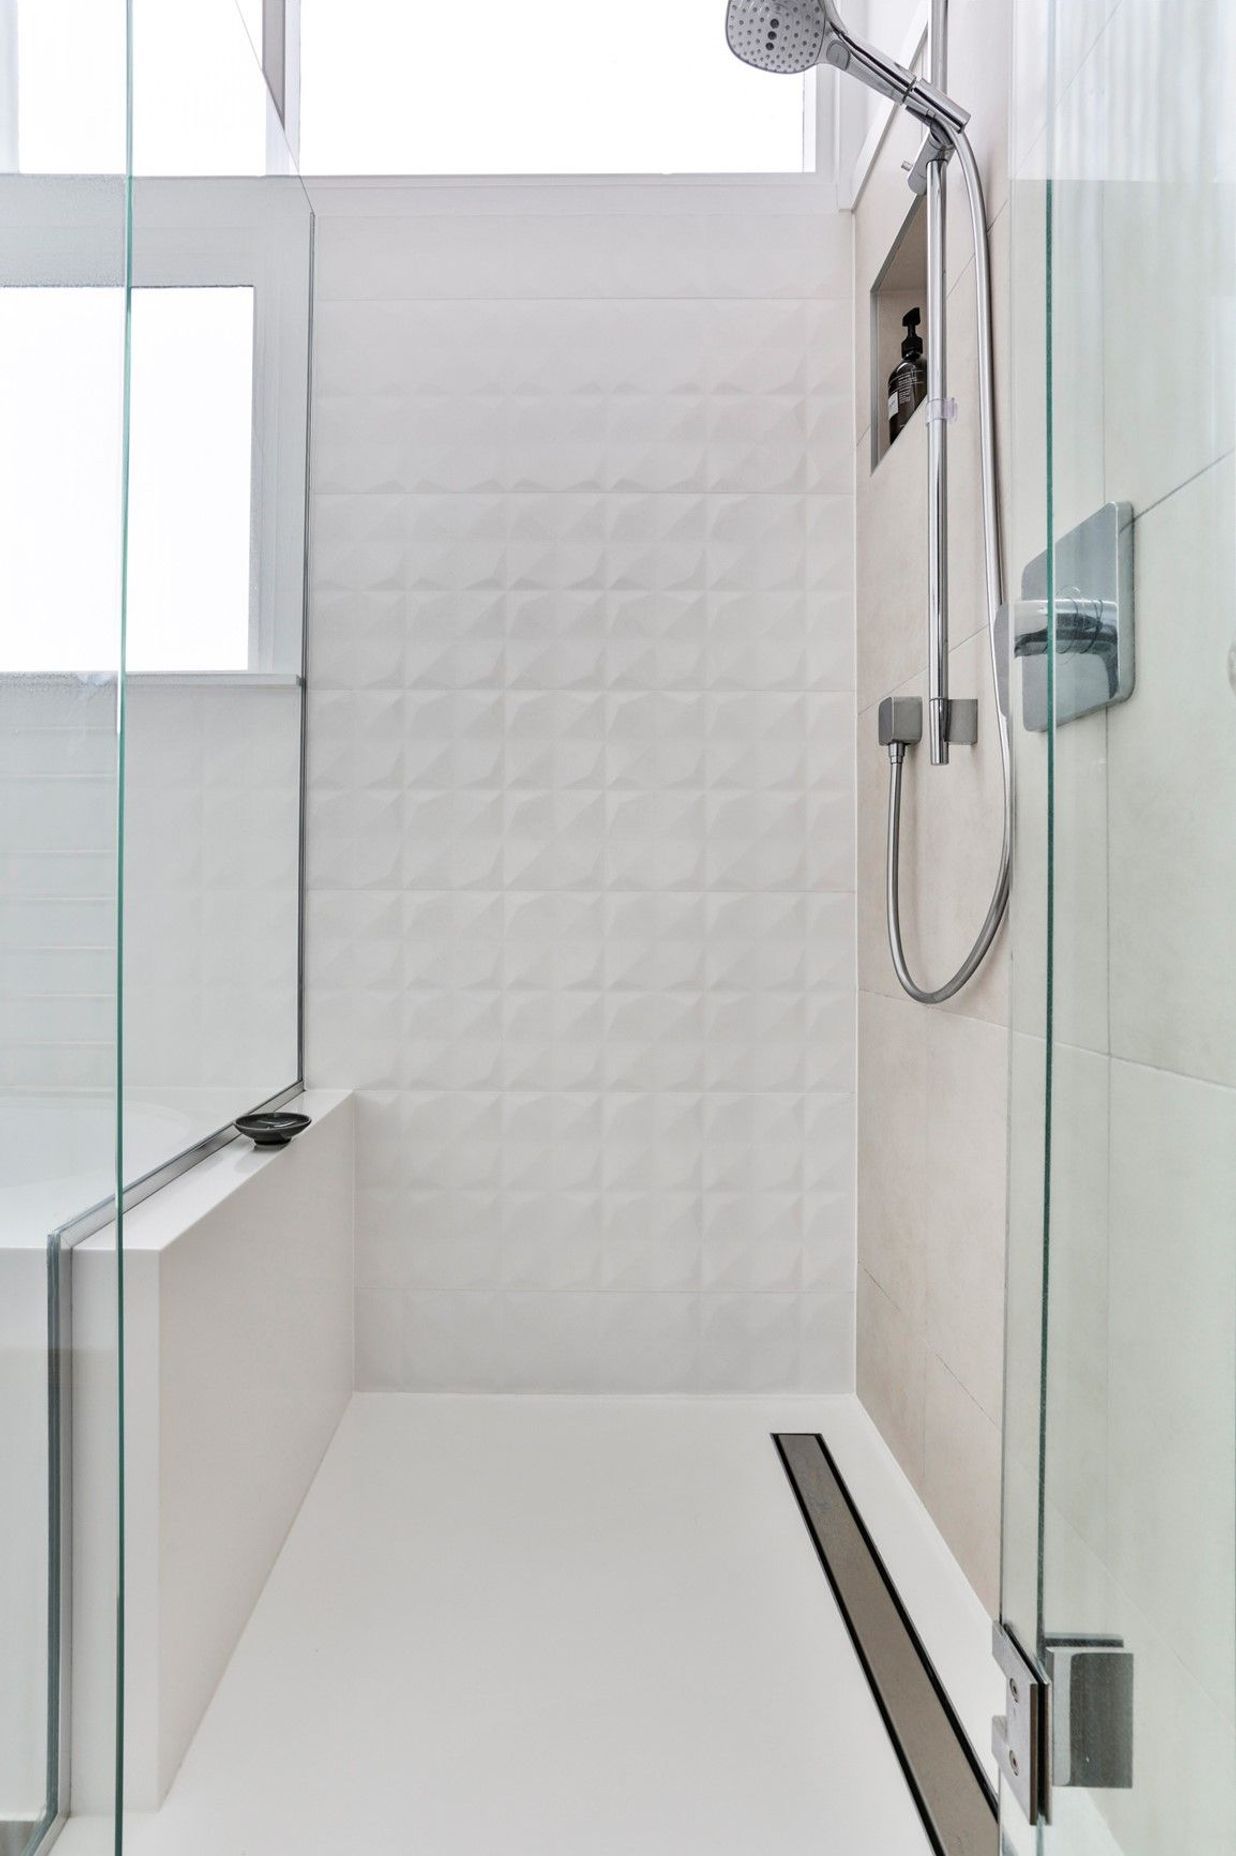 The stream-lined junction between the shower and the bath create the striking monolithic design and delight the owner with its effortless cleaning. 